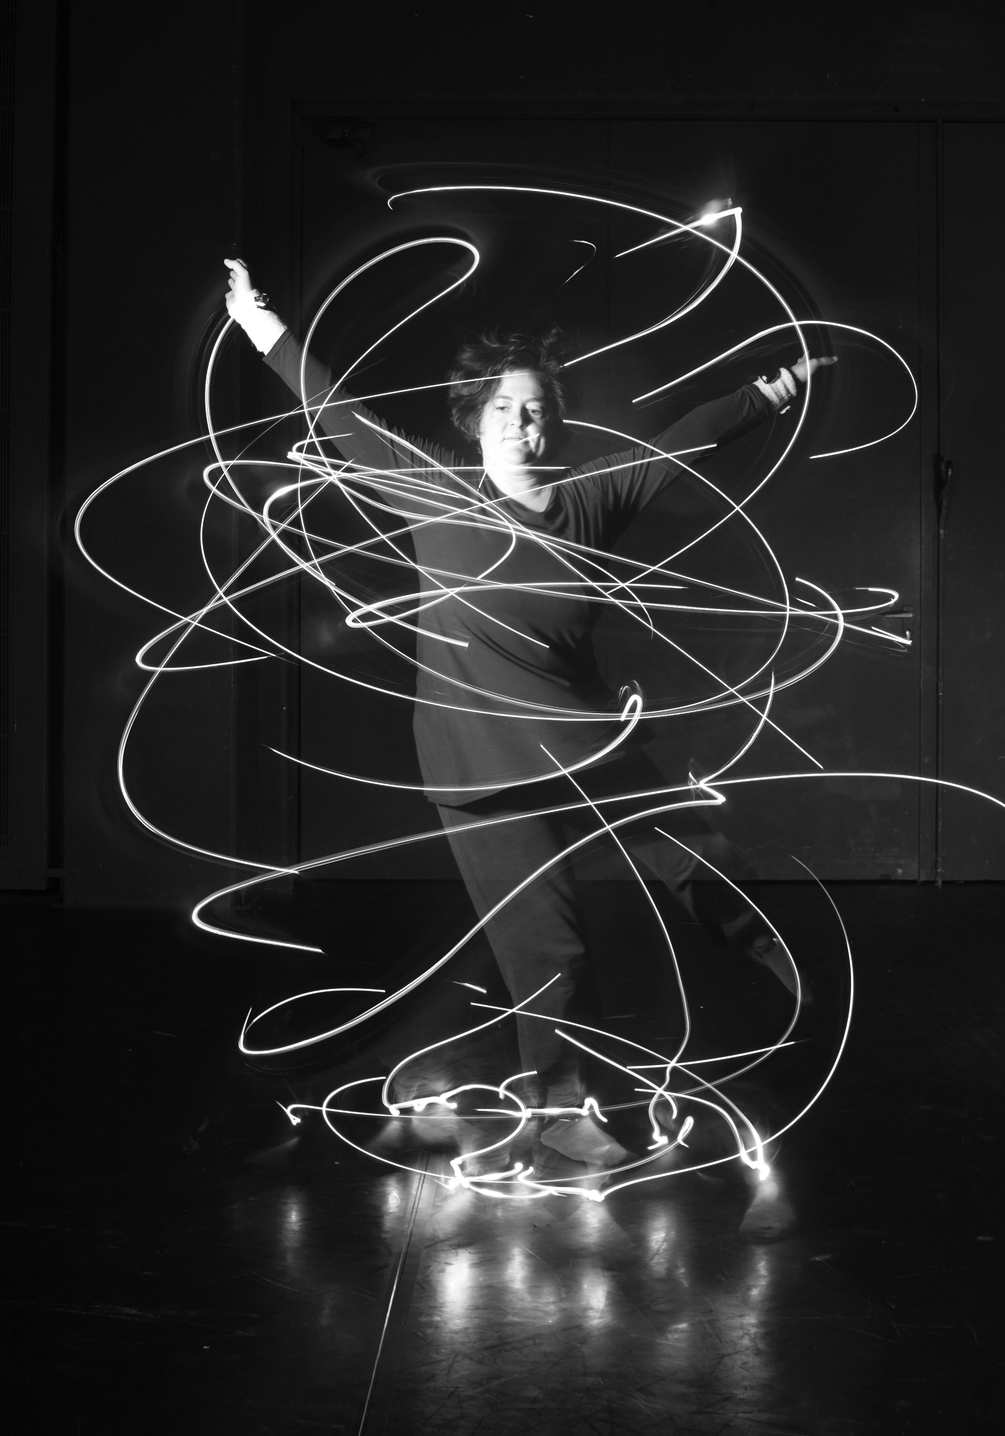 tracking-dance-mounted-miniature-lightbulb-in-motion-1005x1435px